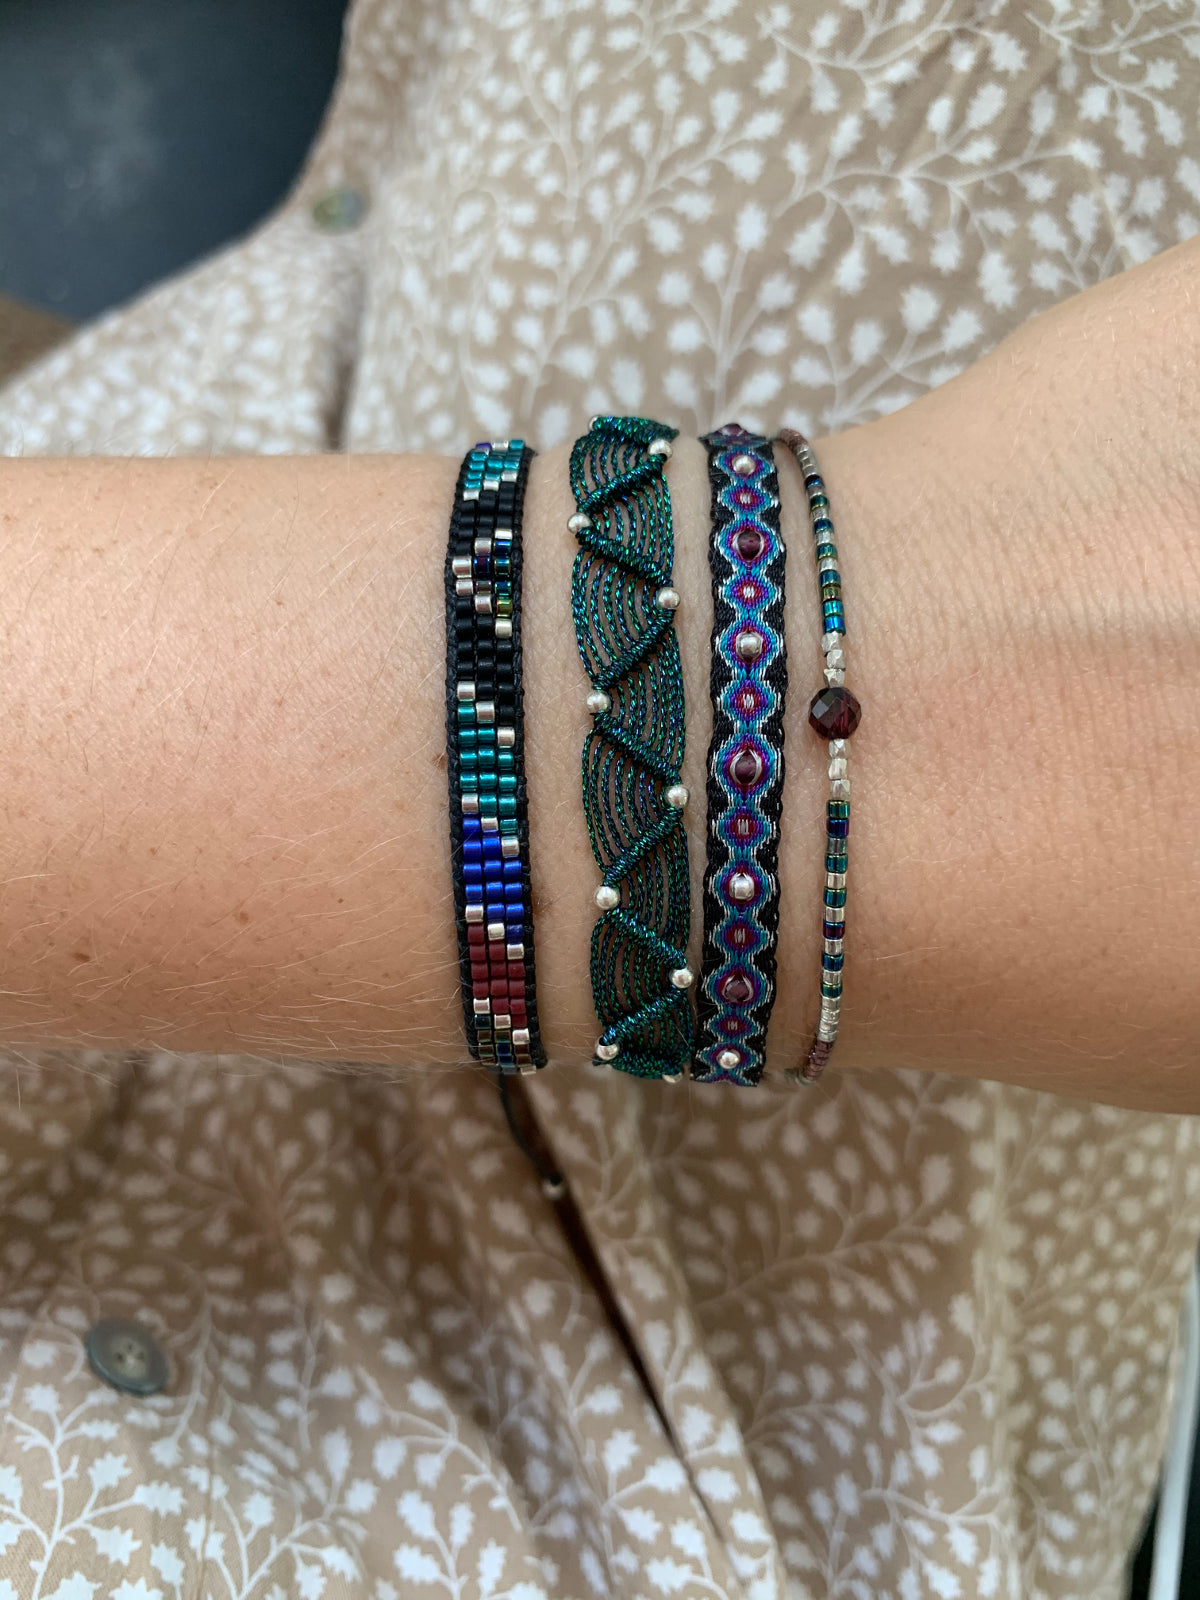 SET OF THREE HANDWOVEN BRACELETS IN DARK TONES WITH SILVER DETAILS